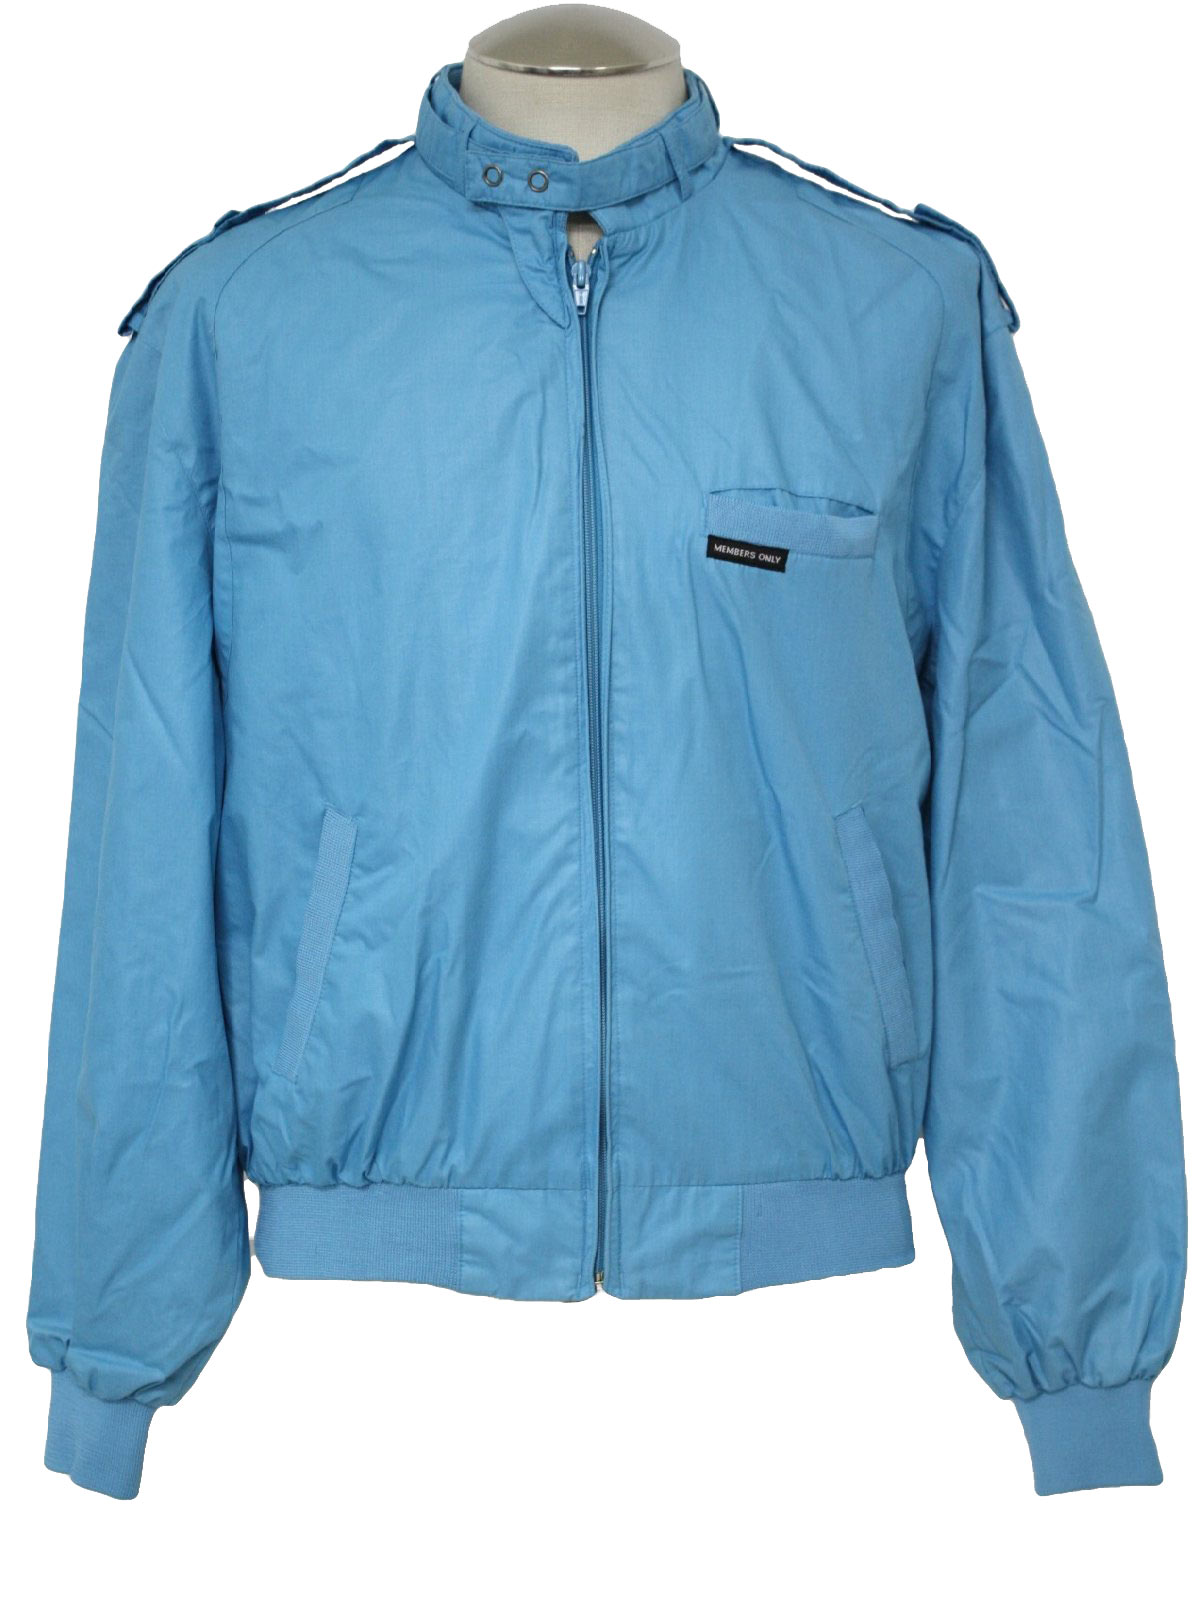 1980's Jacket (Members Only): 80s -Members Only- Mens teal cotton and ...